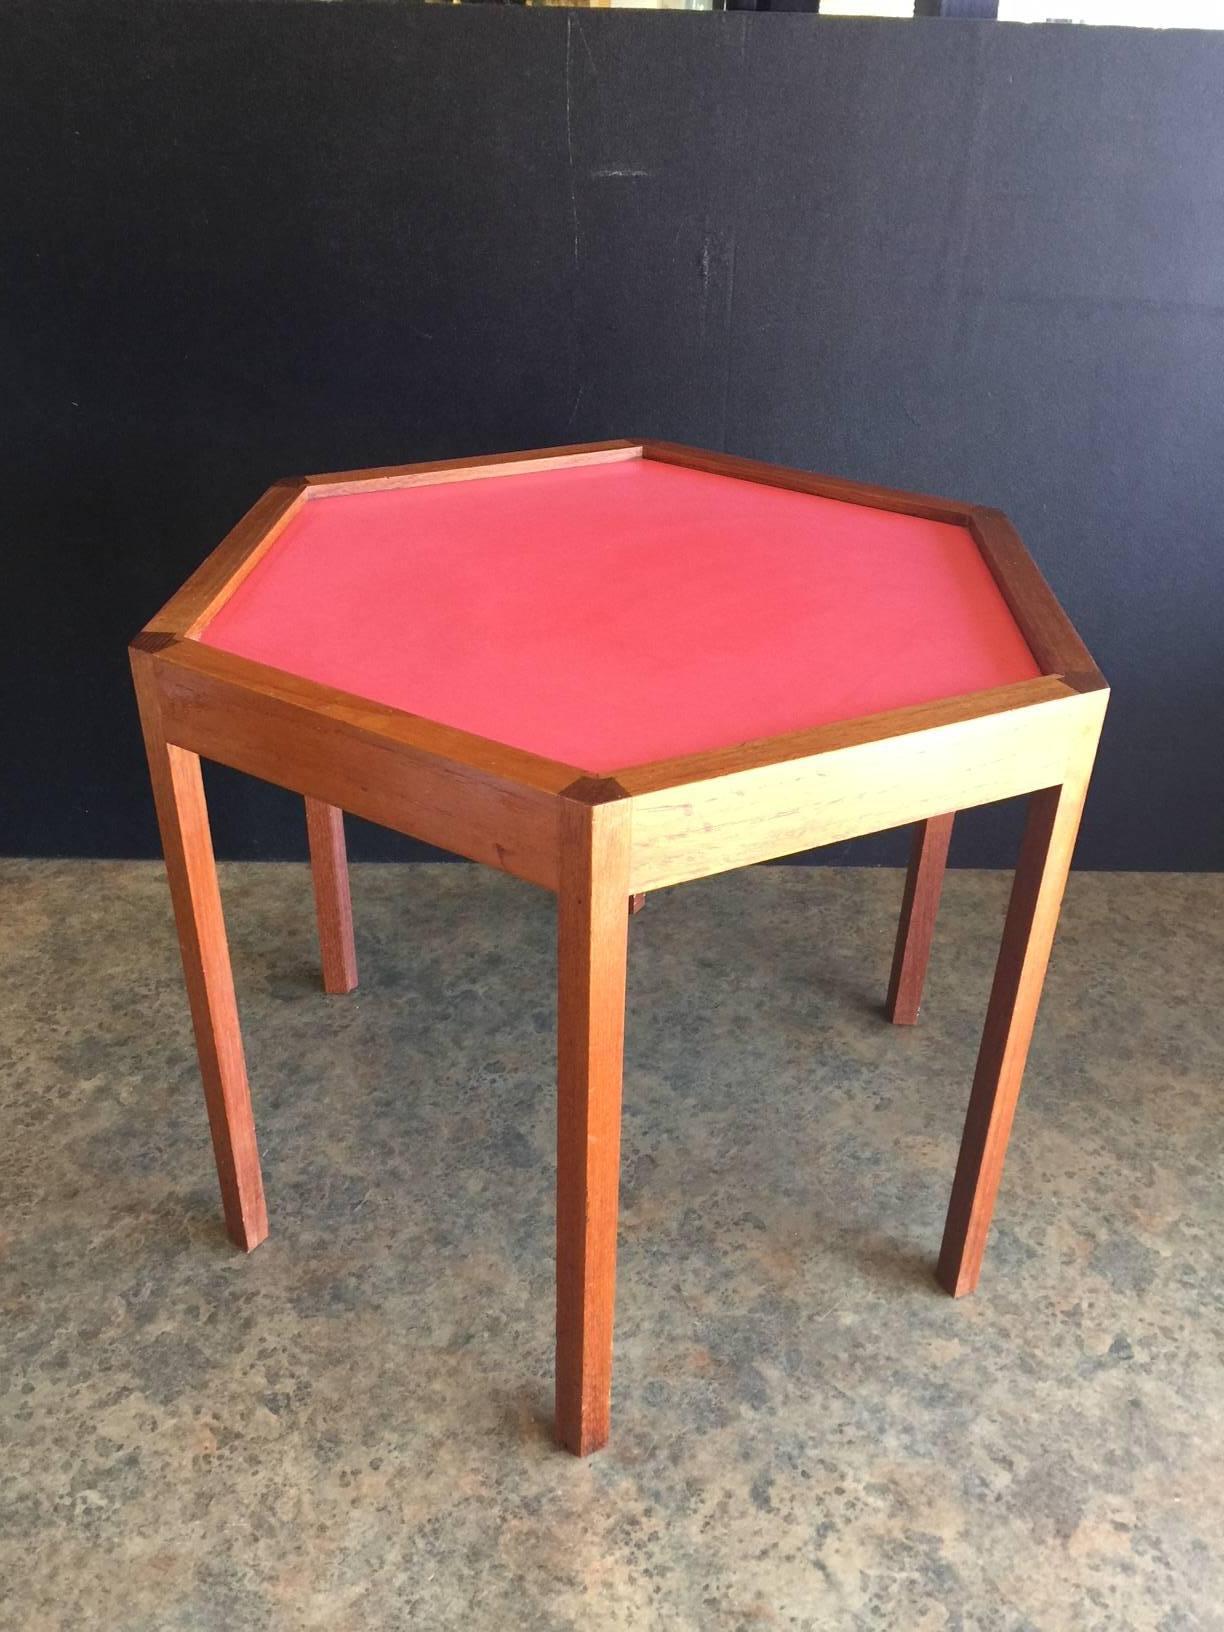 Functional teak and red laminate octagonal side table by Hans Andersen, circa late 1950s.